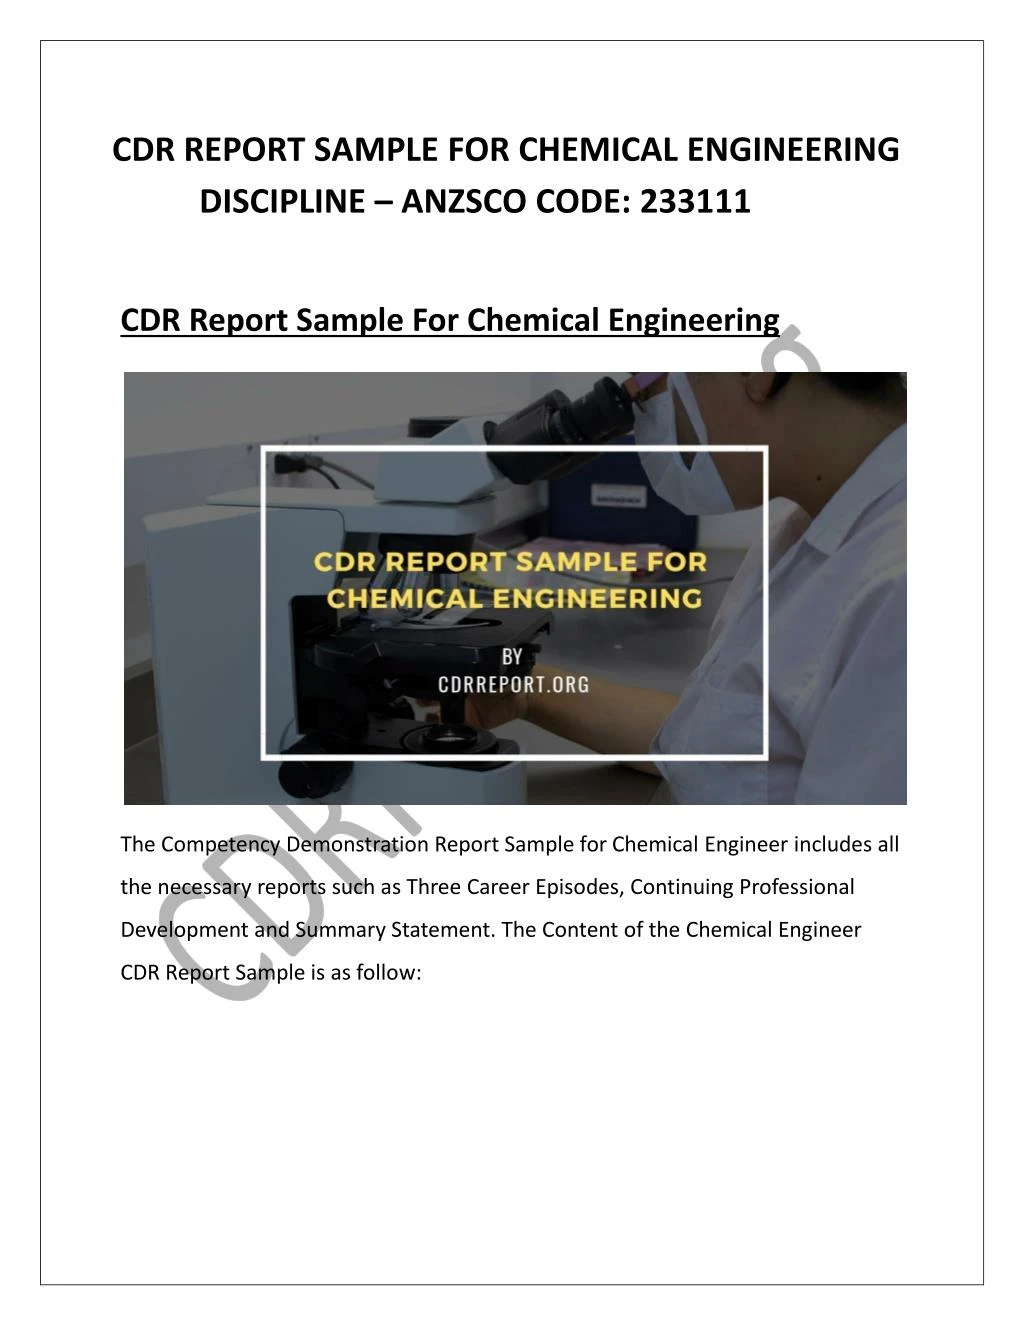 cdr report sample for chemical engineering discipline anzsco code 233111